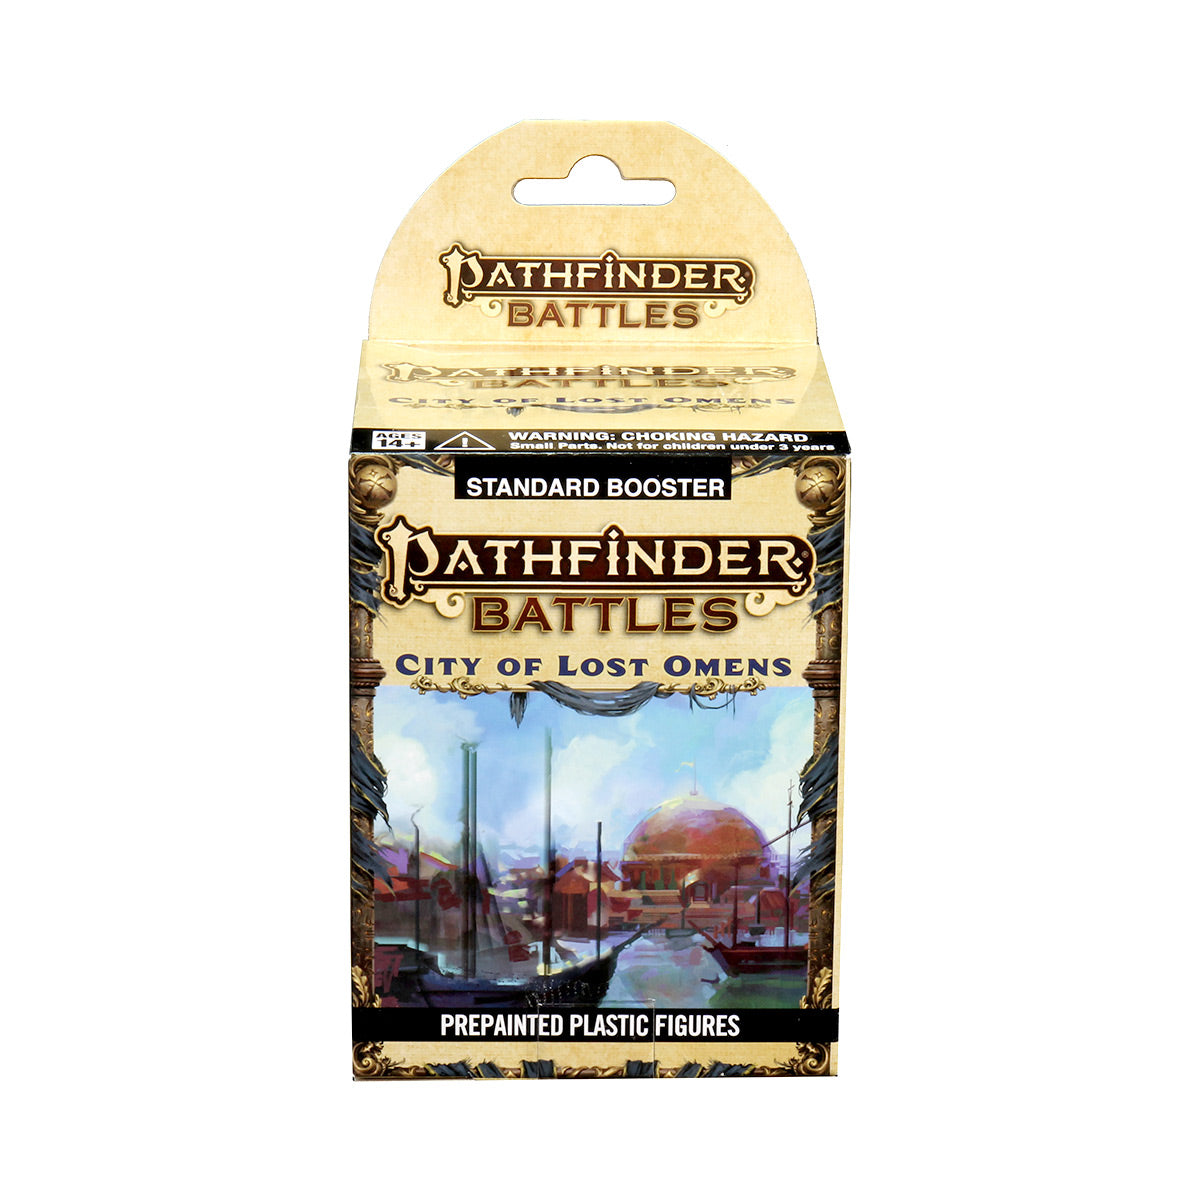 Pathfinder Battles: City of Lost Omens Booster Box